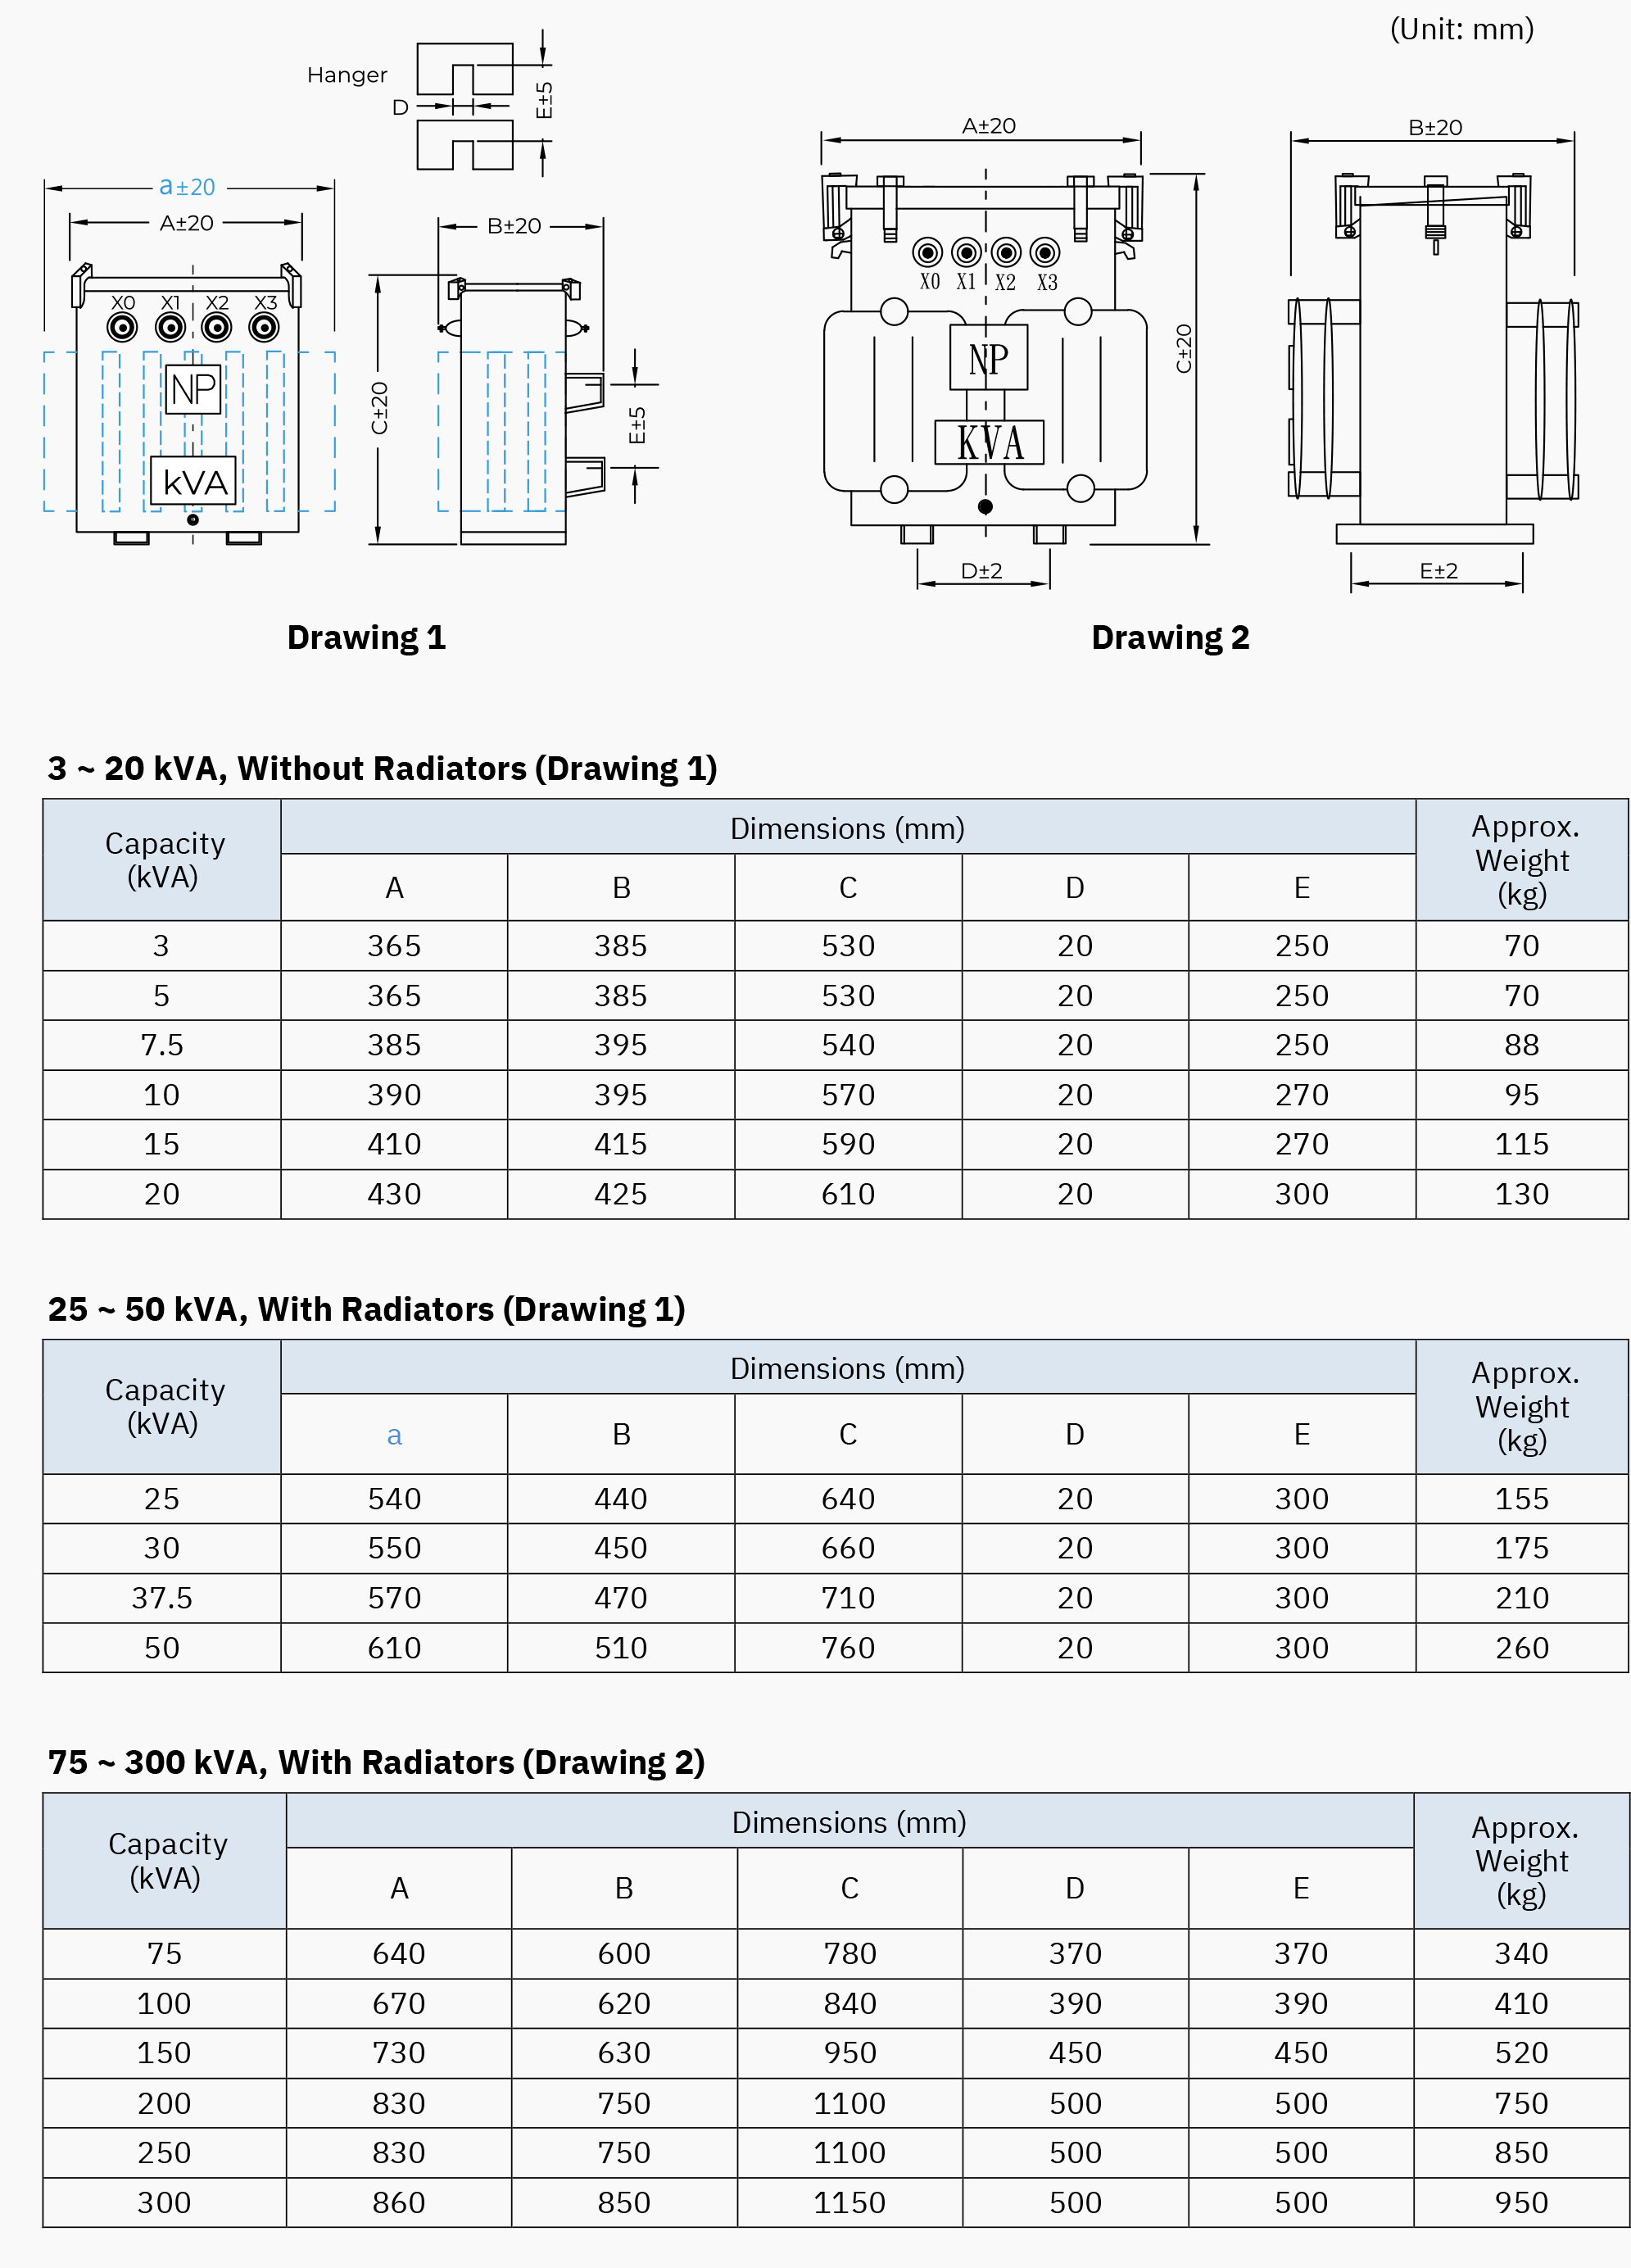 LV Oil Transformers - Drawings and Selection Tables